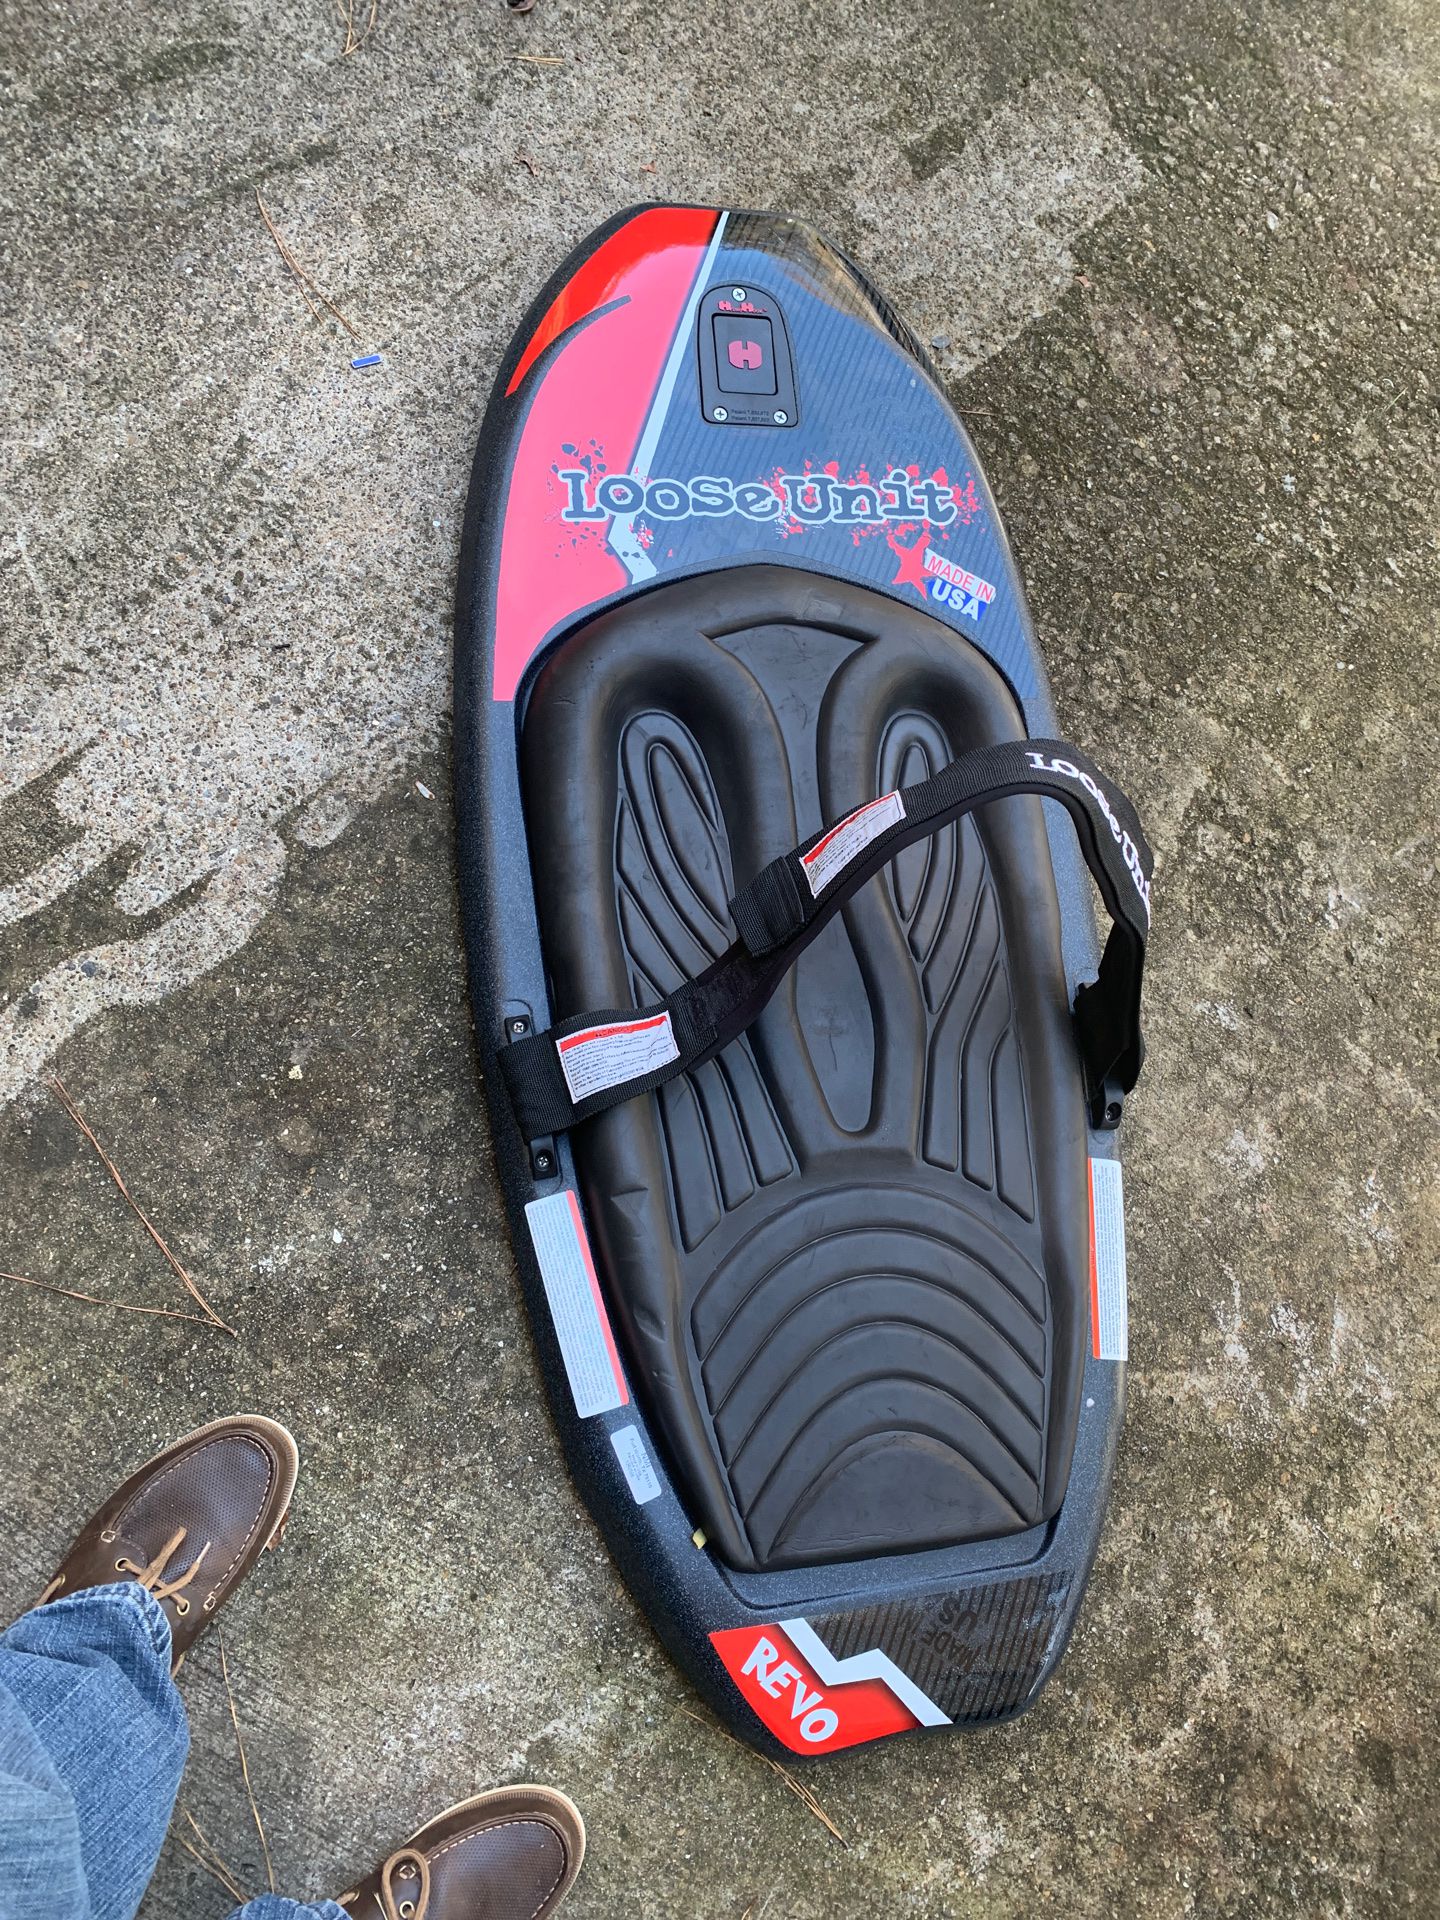 Loose unit knee board. Used only once